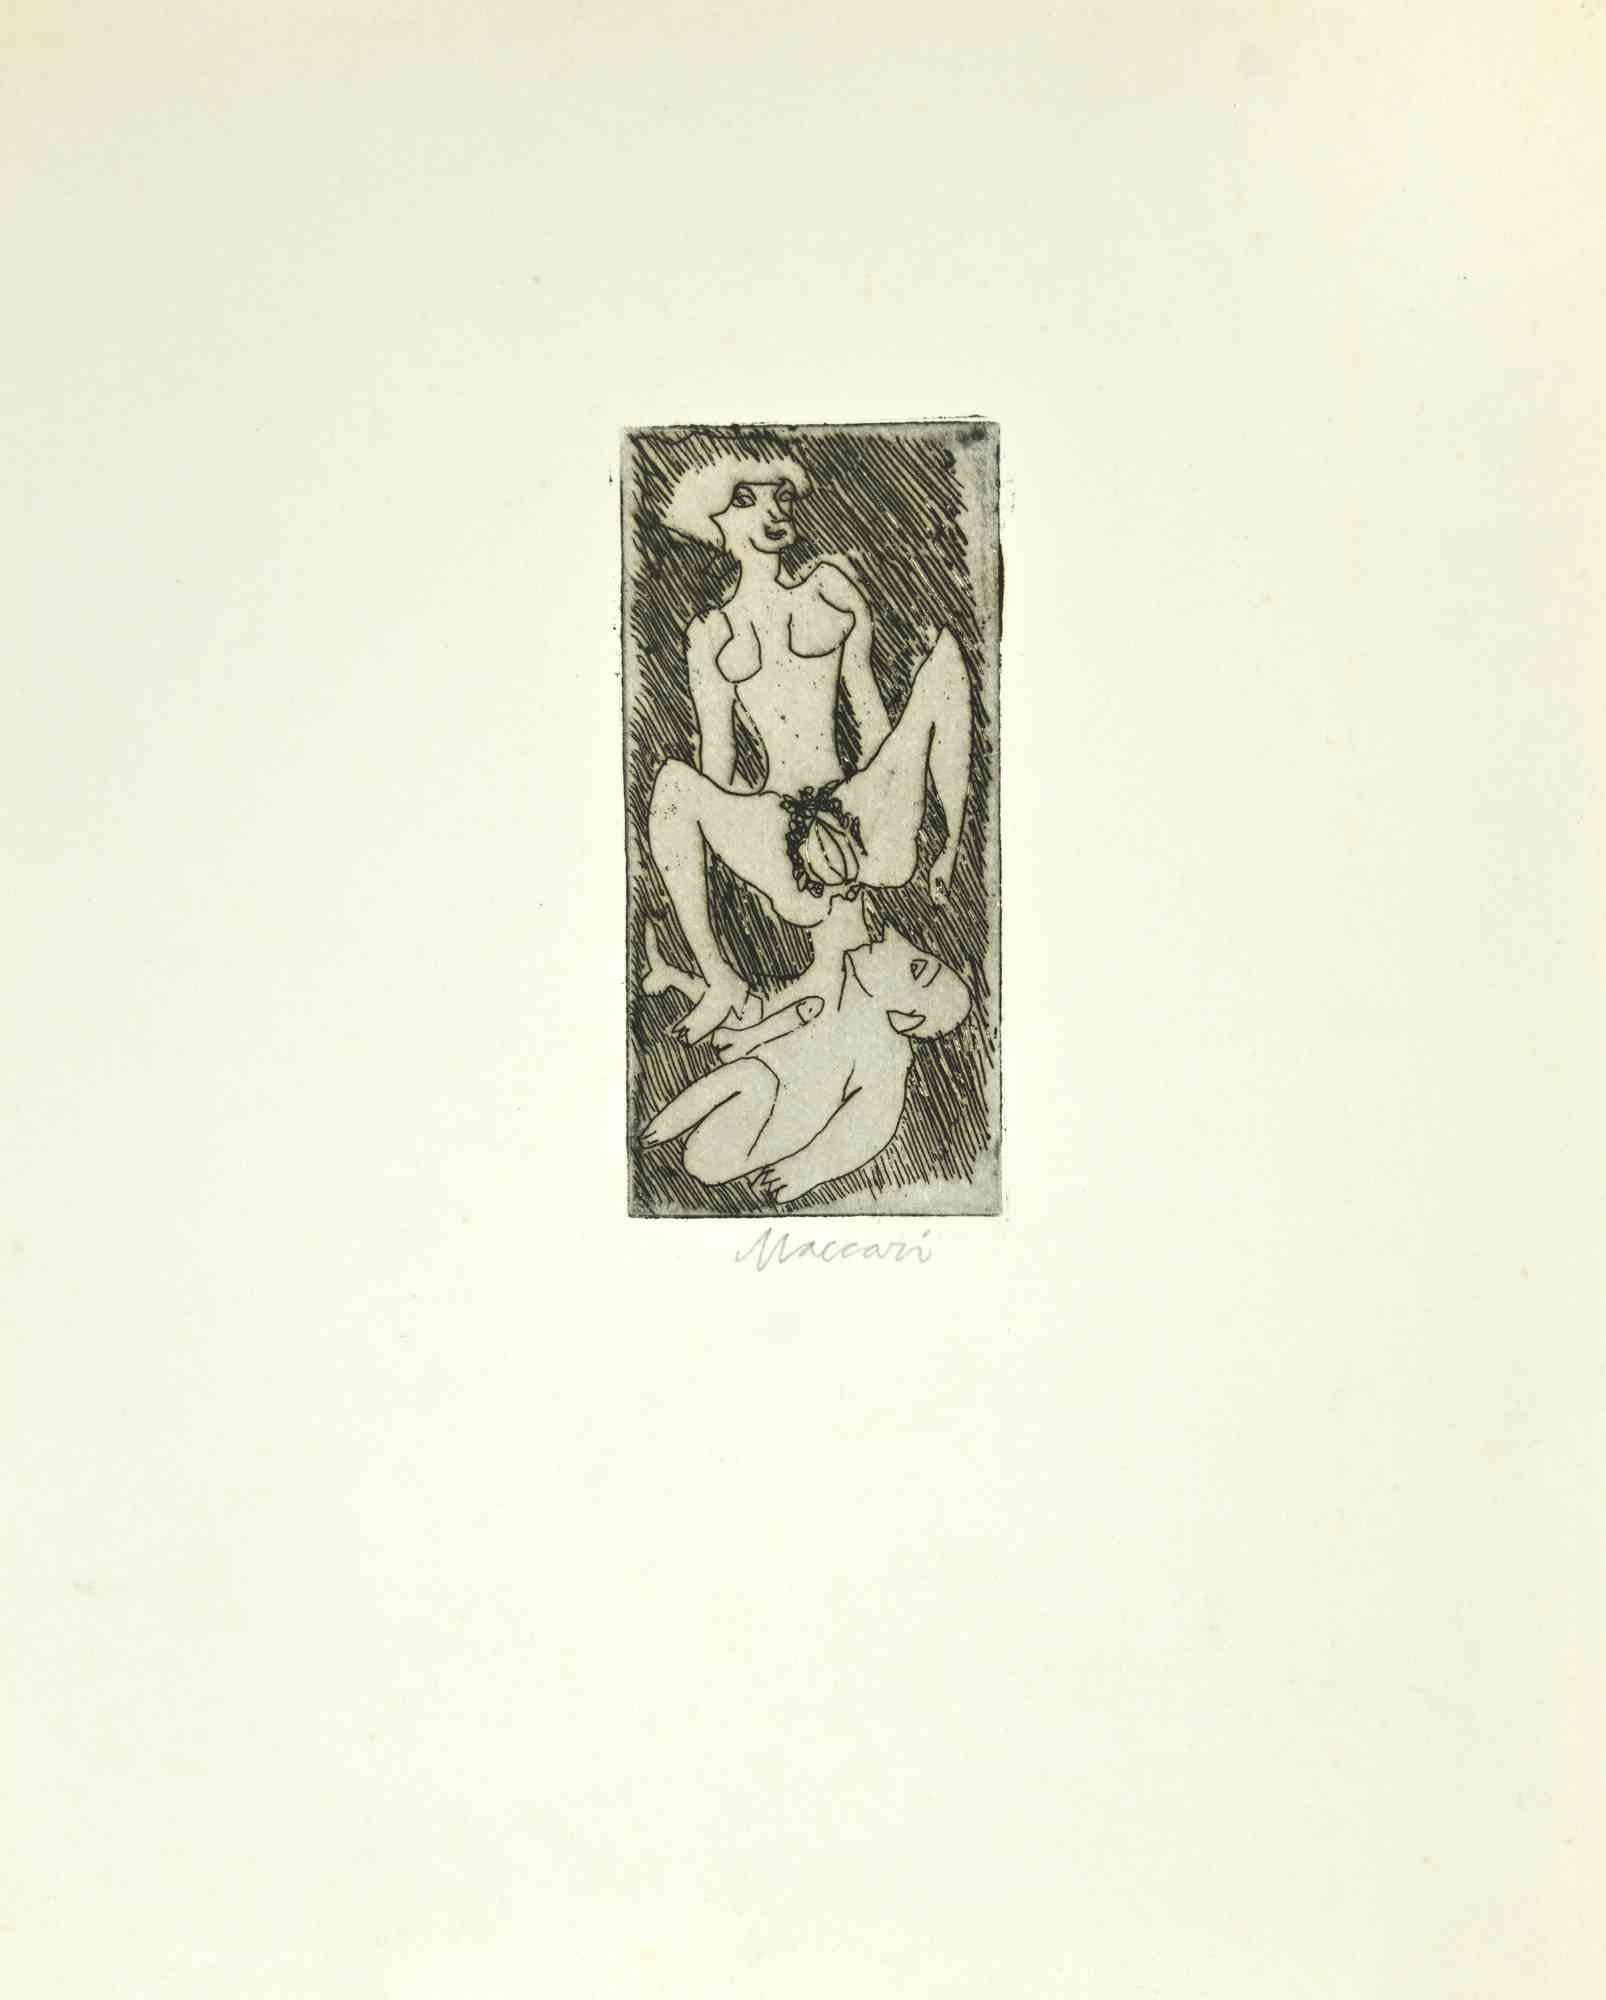 Erotic Scene is an Etching and Drypoint realized by Mino Maccari in the Mid-20th Century.

Hand-signed in the lower part.

Good conditions.

Mino Maccari (Siena, 1924-Rome, June 16, 1989) was an Italian writer, painter, engraver and journalist,